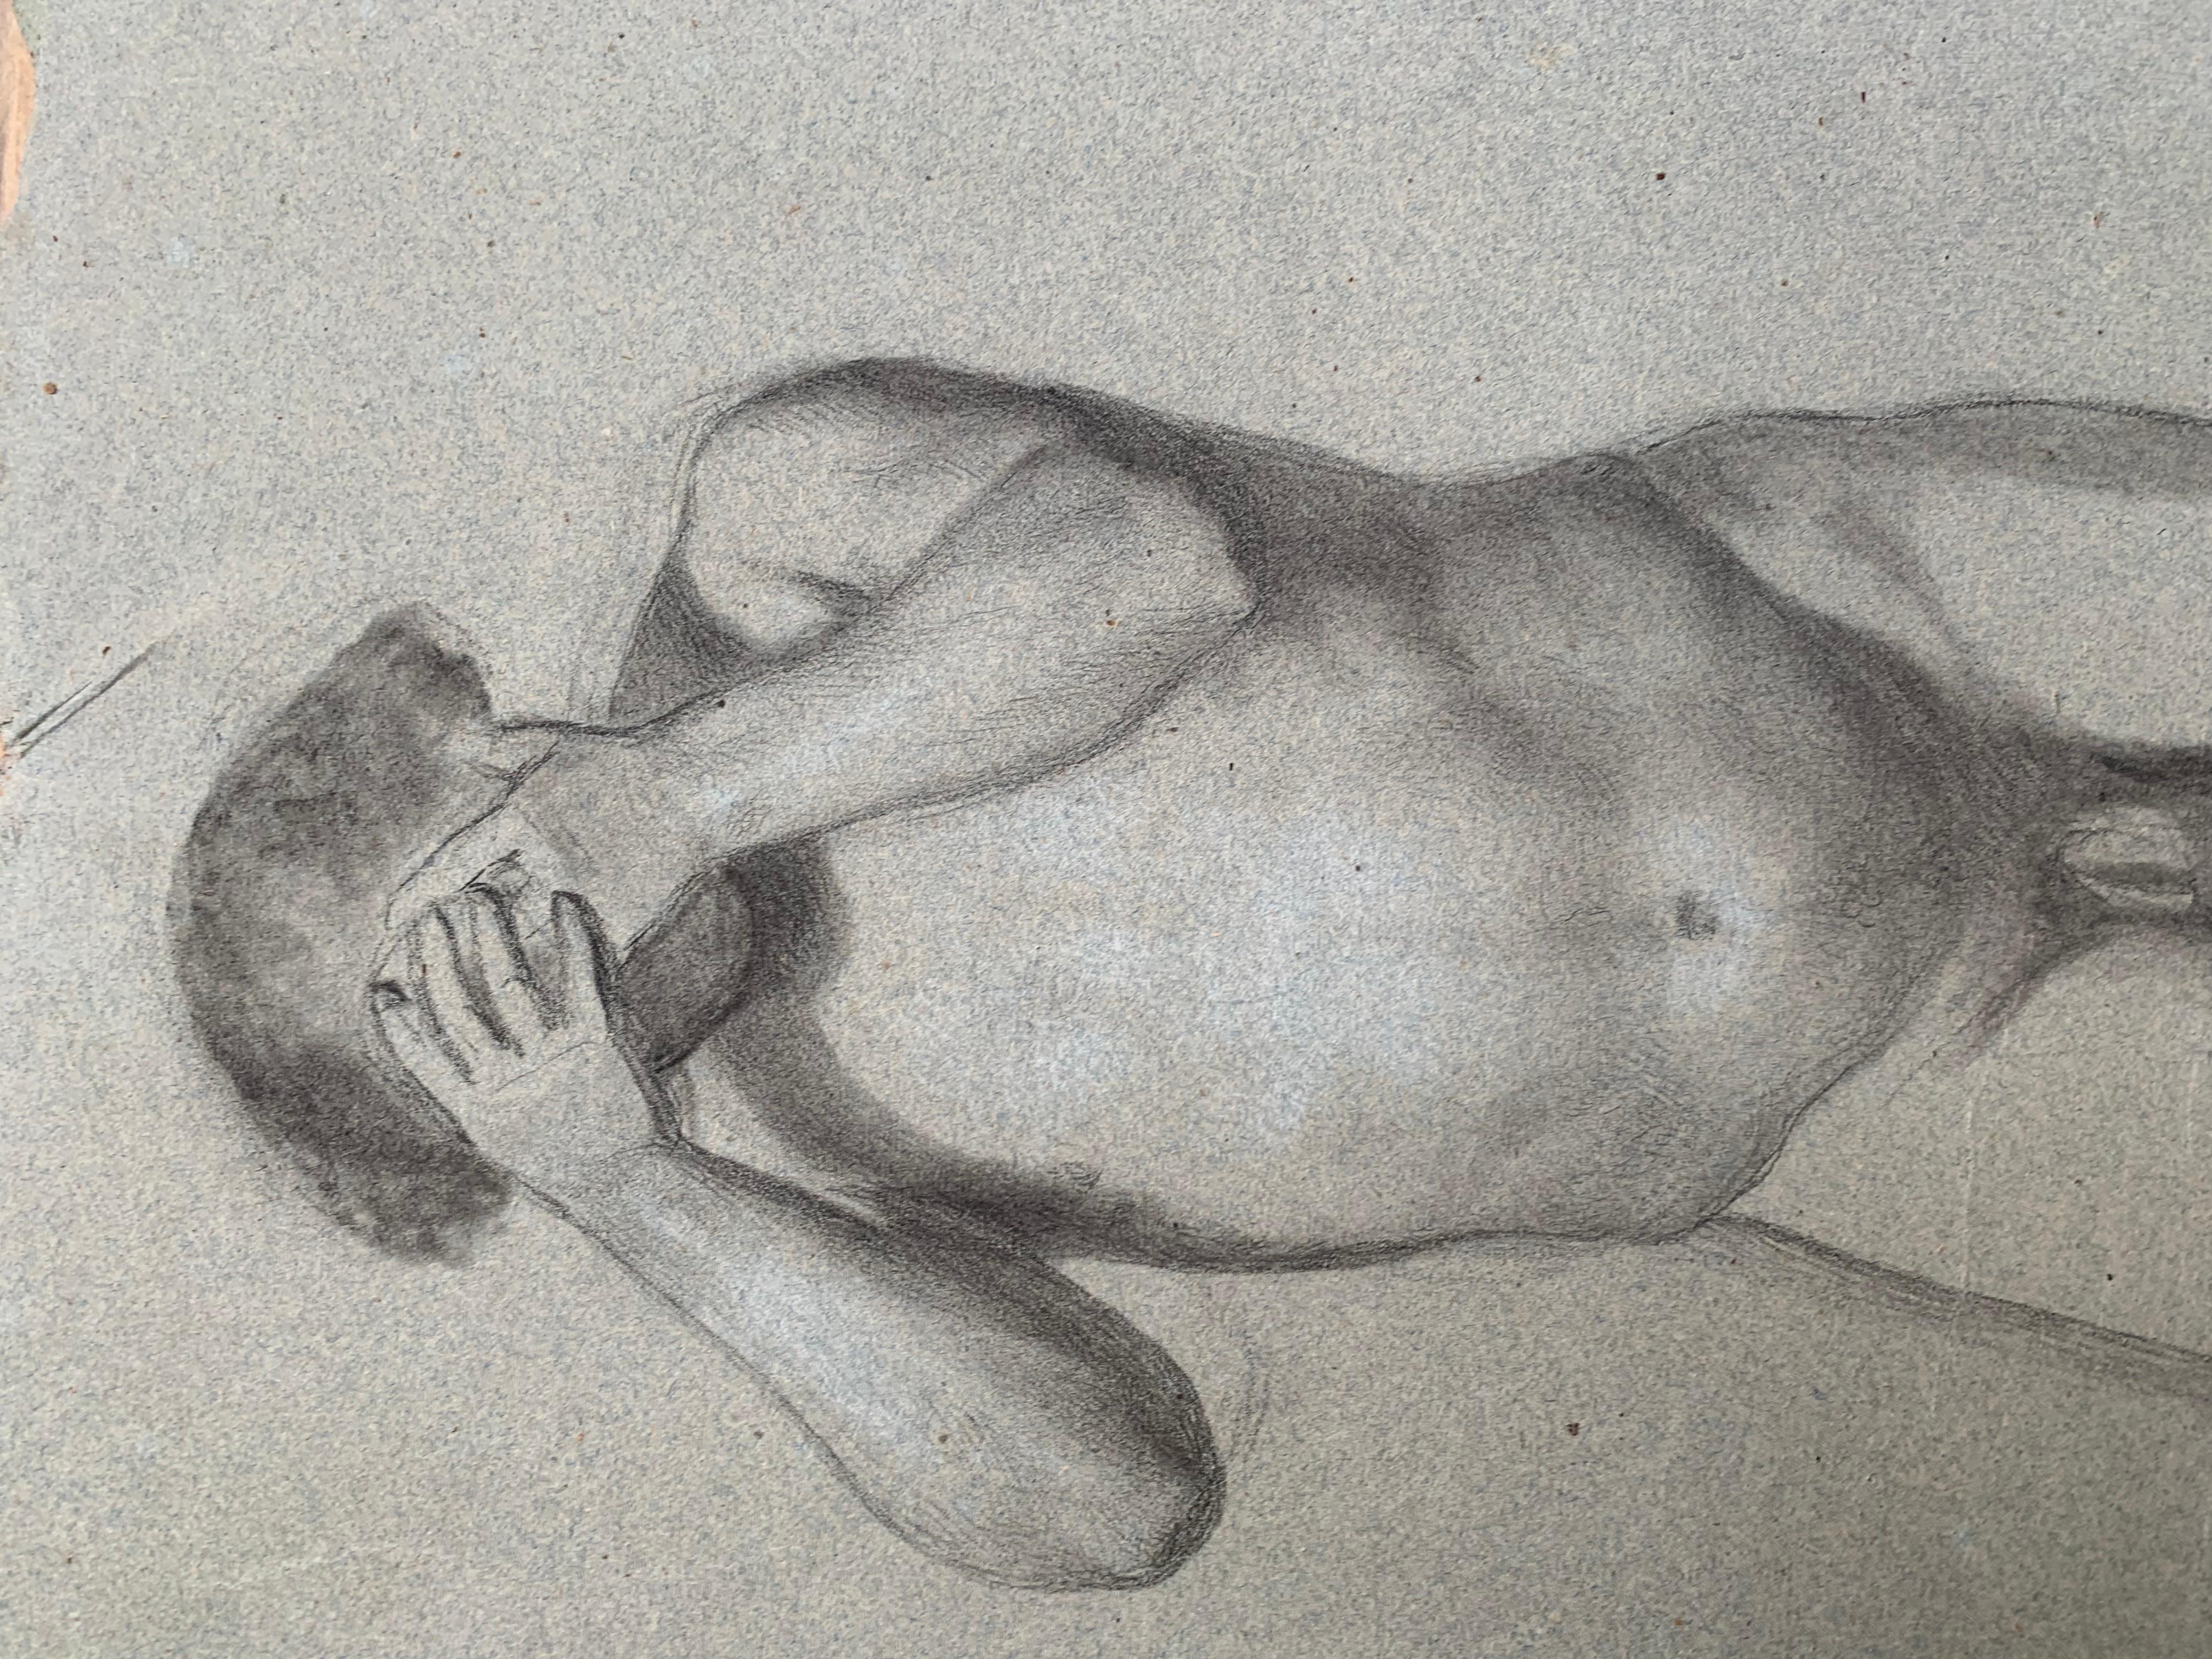 Preparatory anatomical study for the figure of a man with hands on his face.
Drawing of a medium-sized male nude.
From the 19th century
Drawing on slightly greyish colored paper.
In good condition. Irregular margins with application marks on support